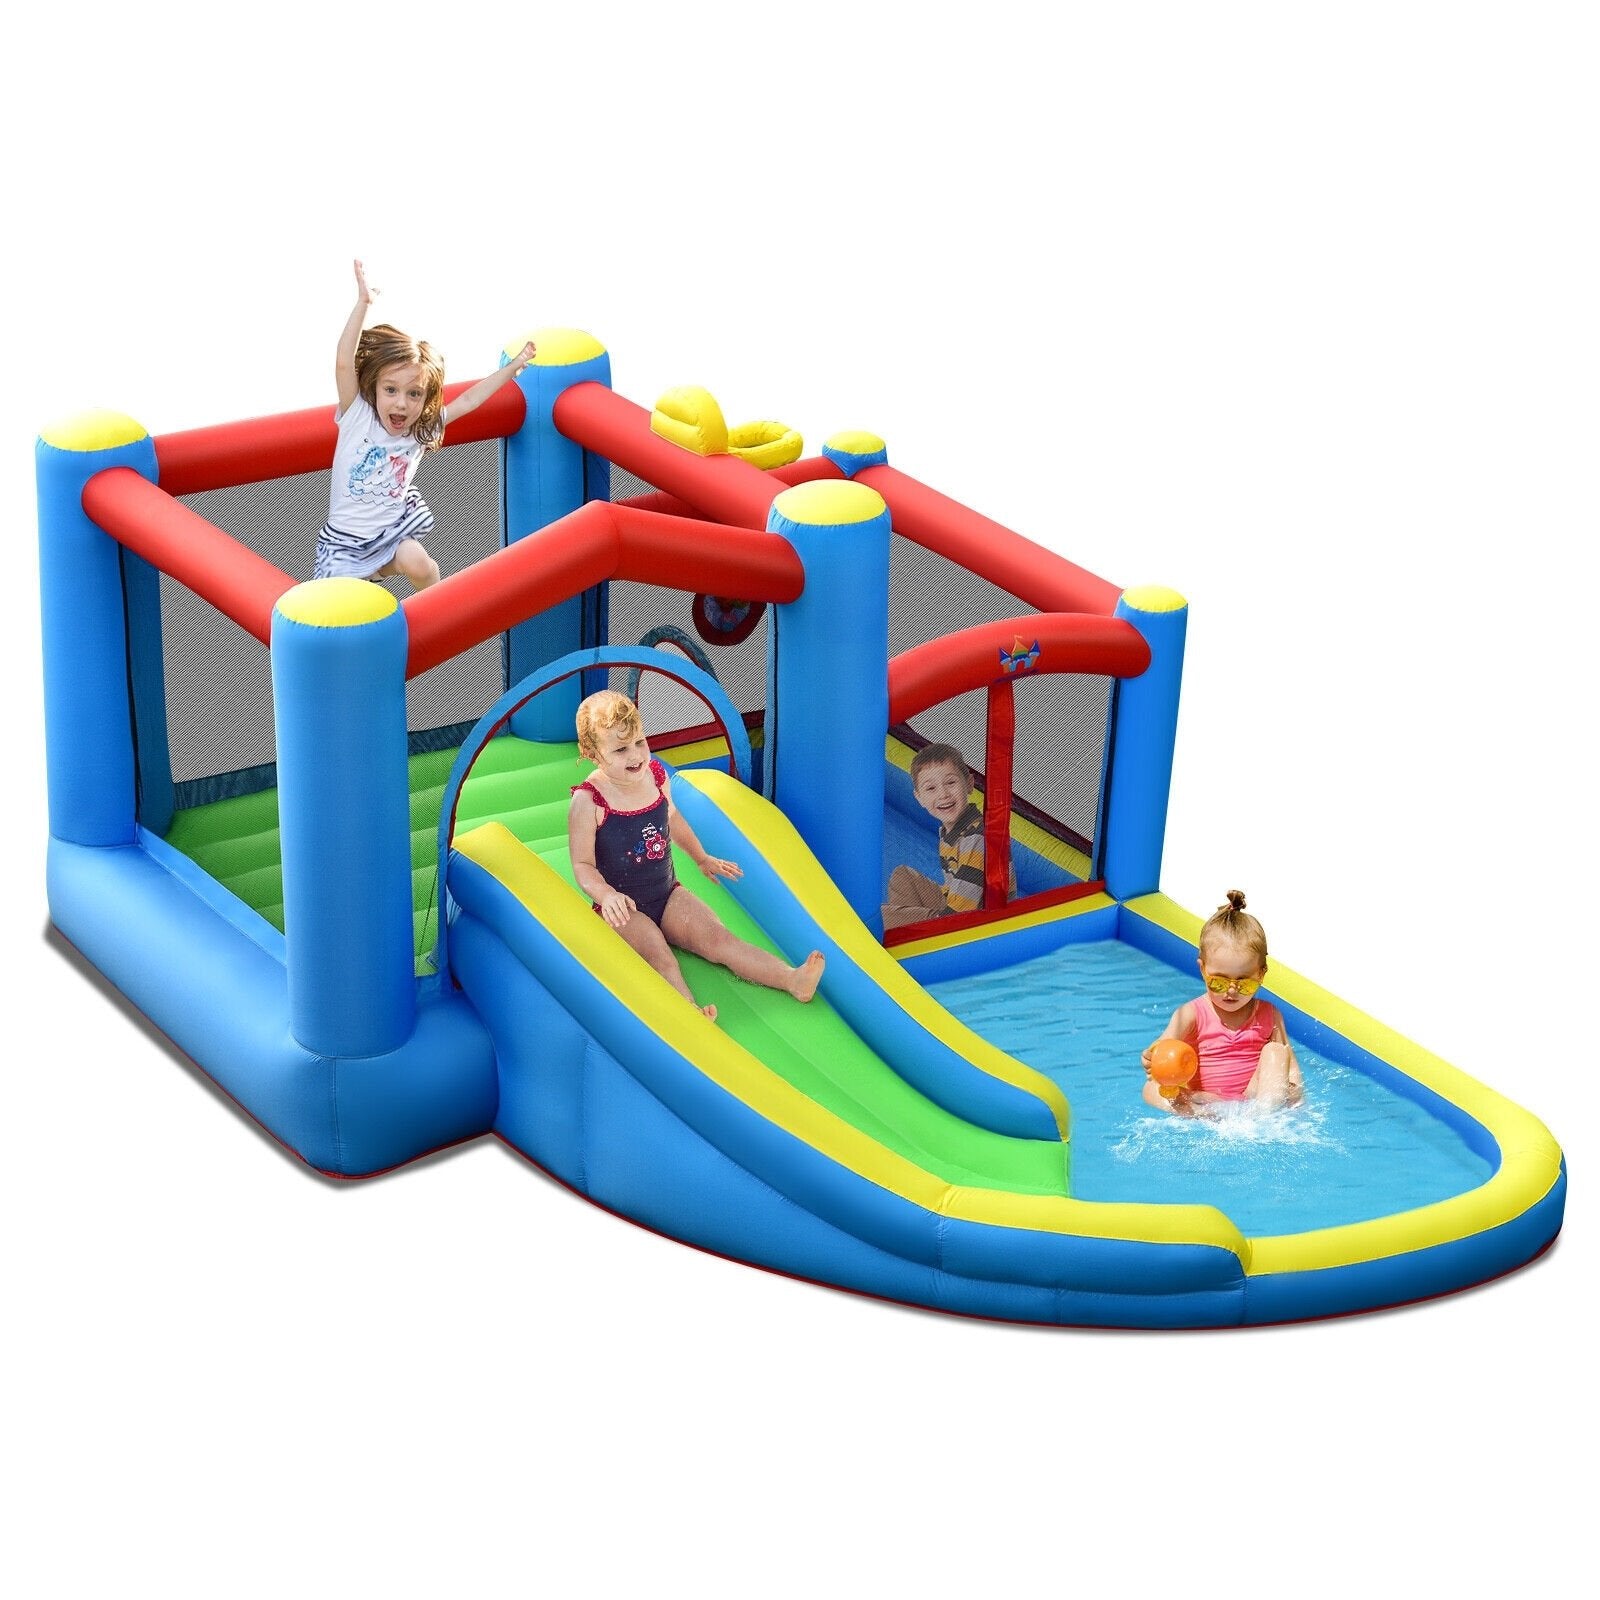 Inflatable Kids Water Slide Bounce Castle with 480W Blower at Gallery Canada